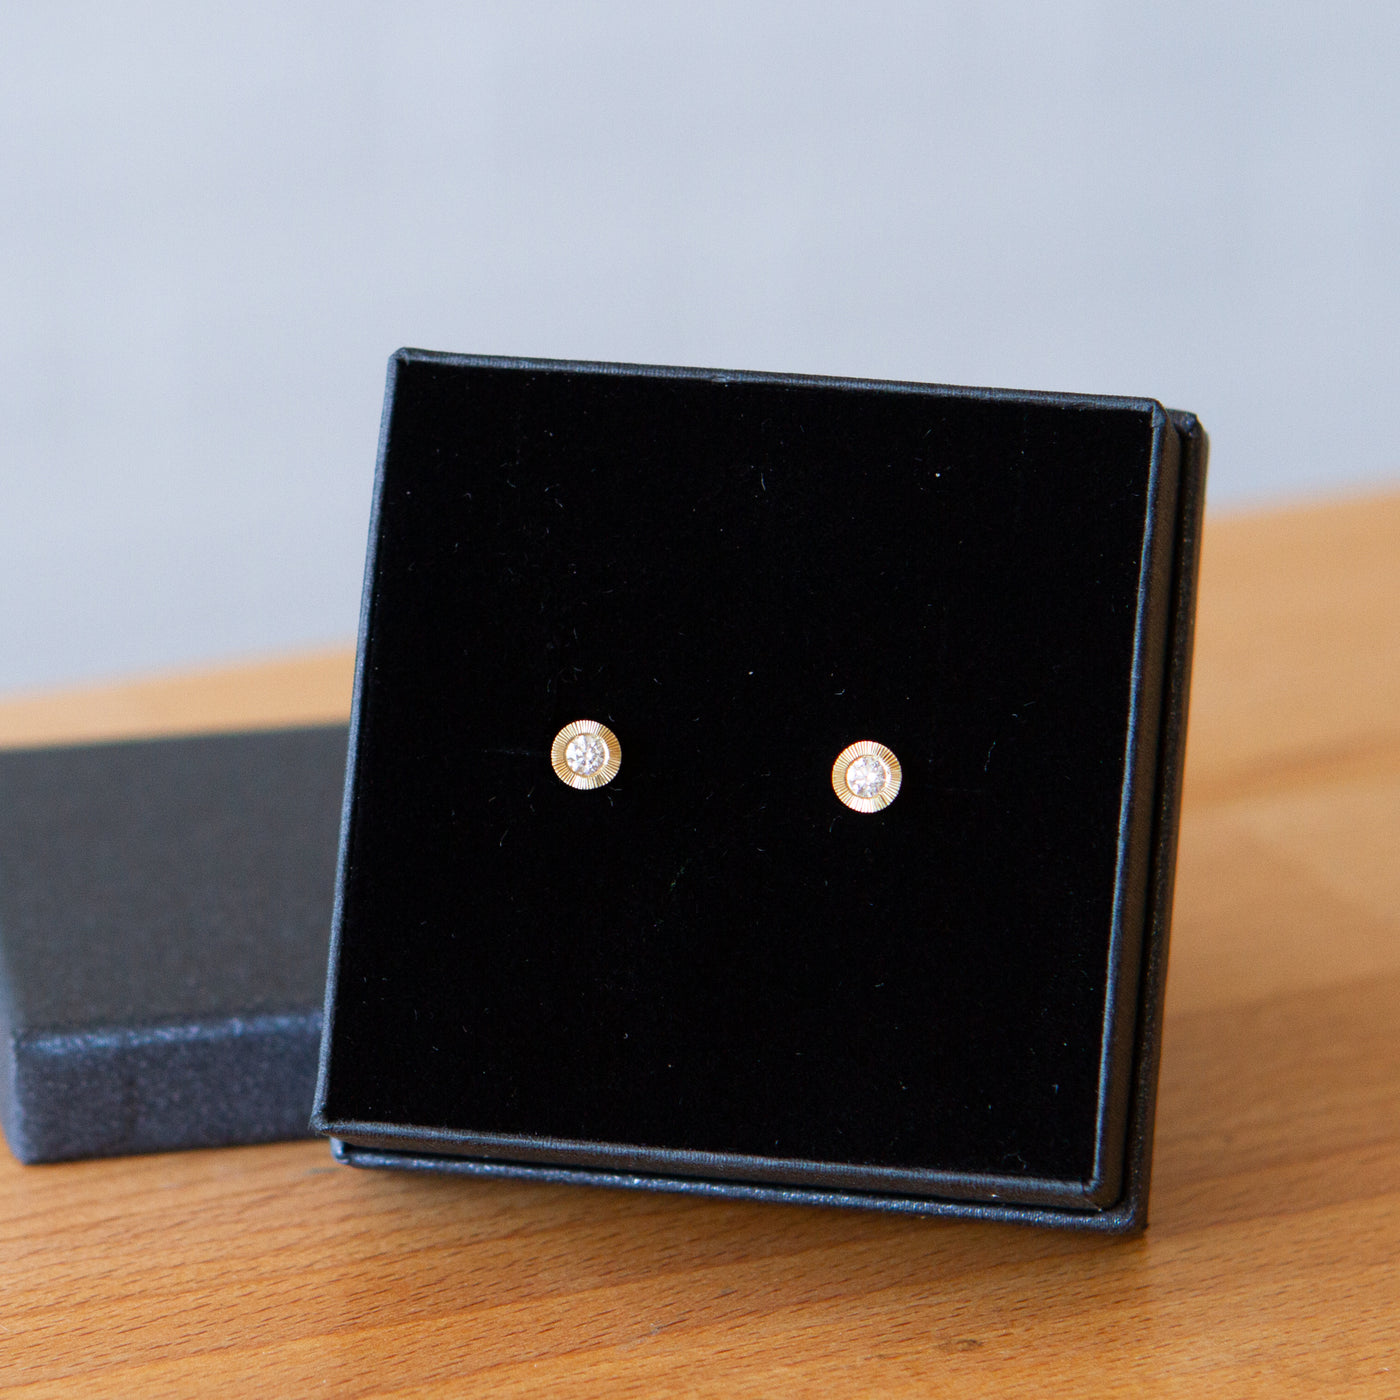 Large Diamond Aurora stud earring in yellow gold with an engraved halo border in a gift box